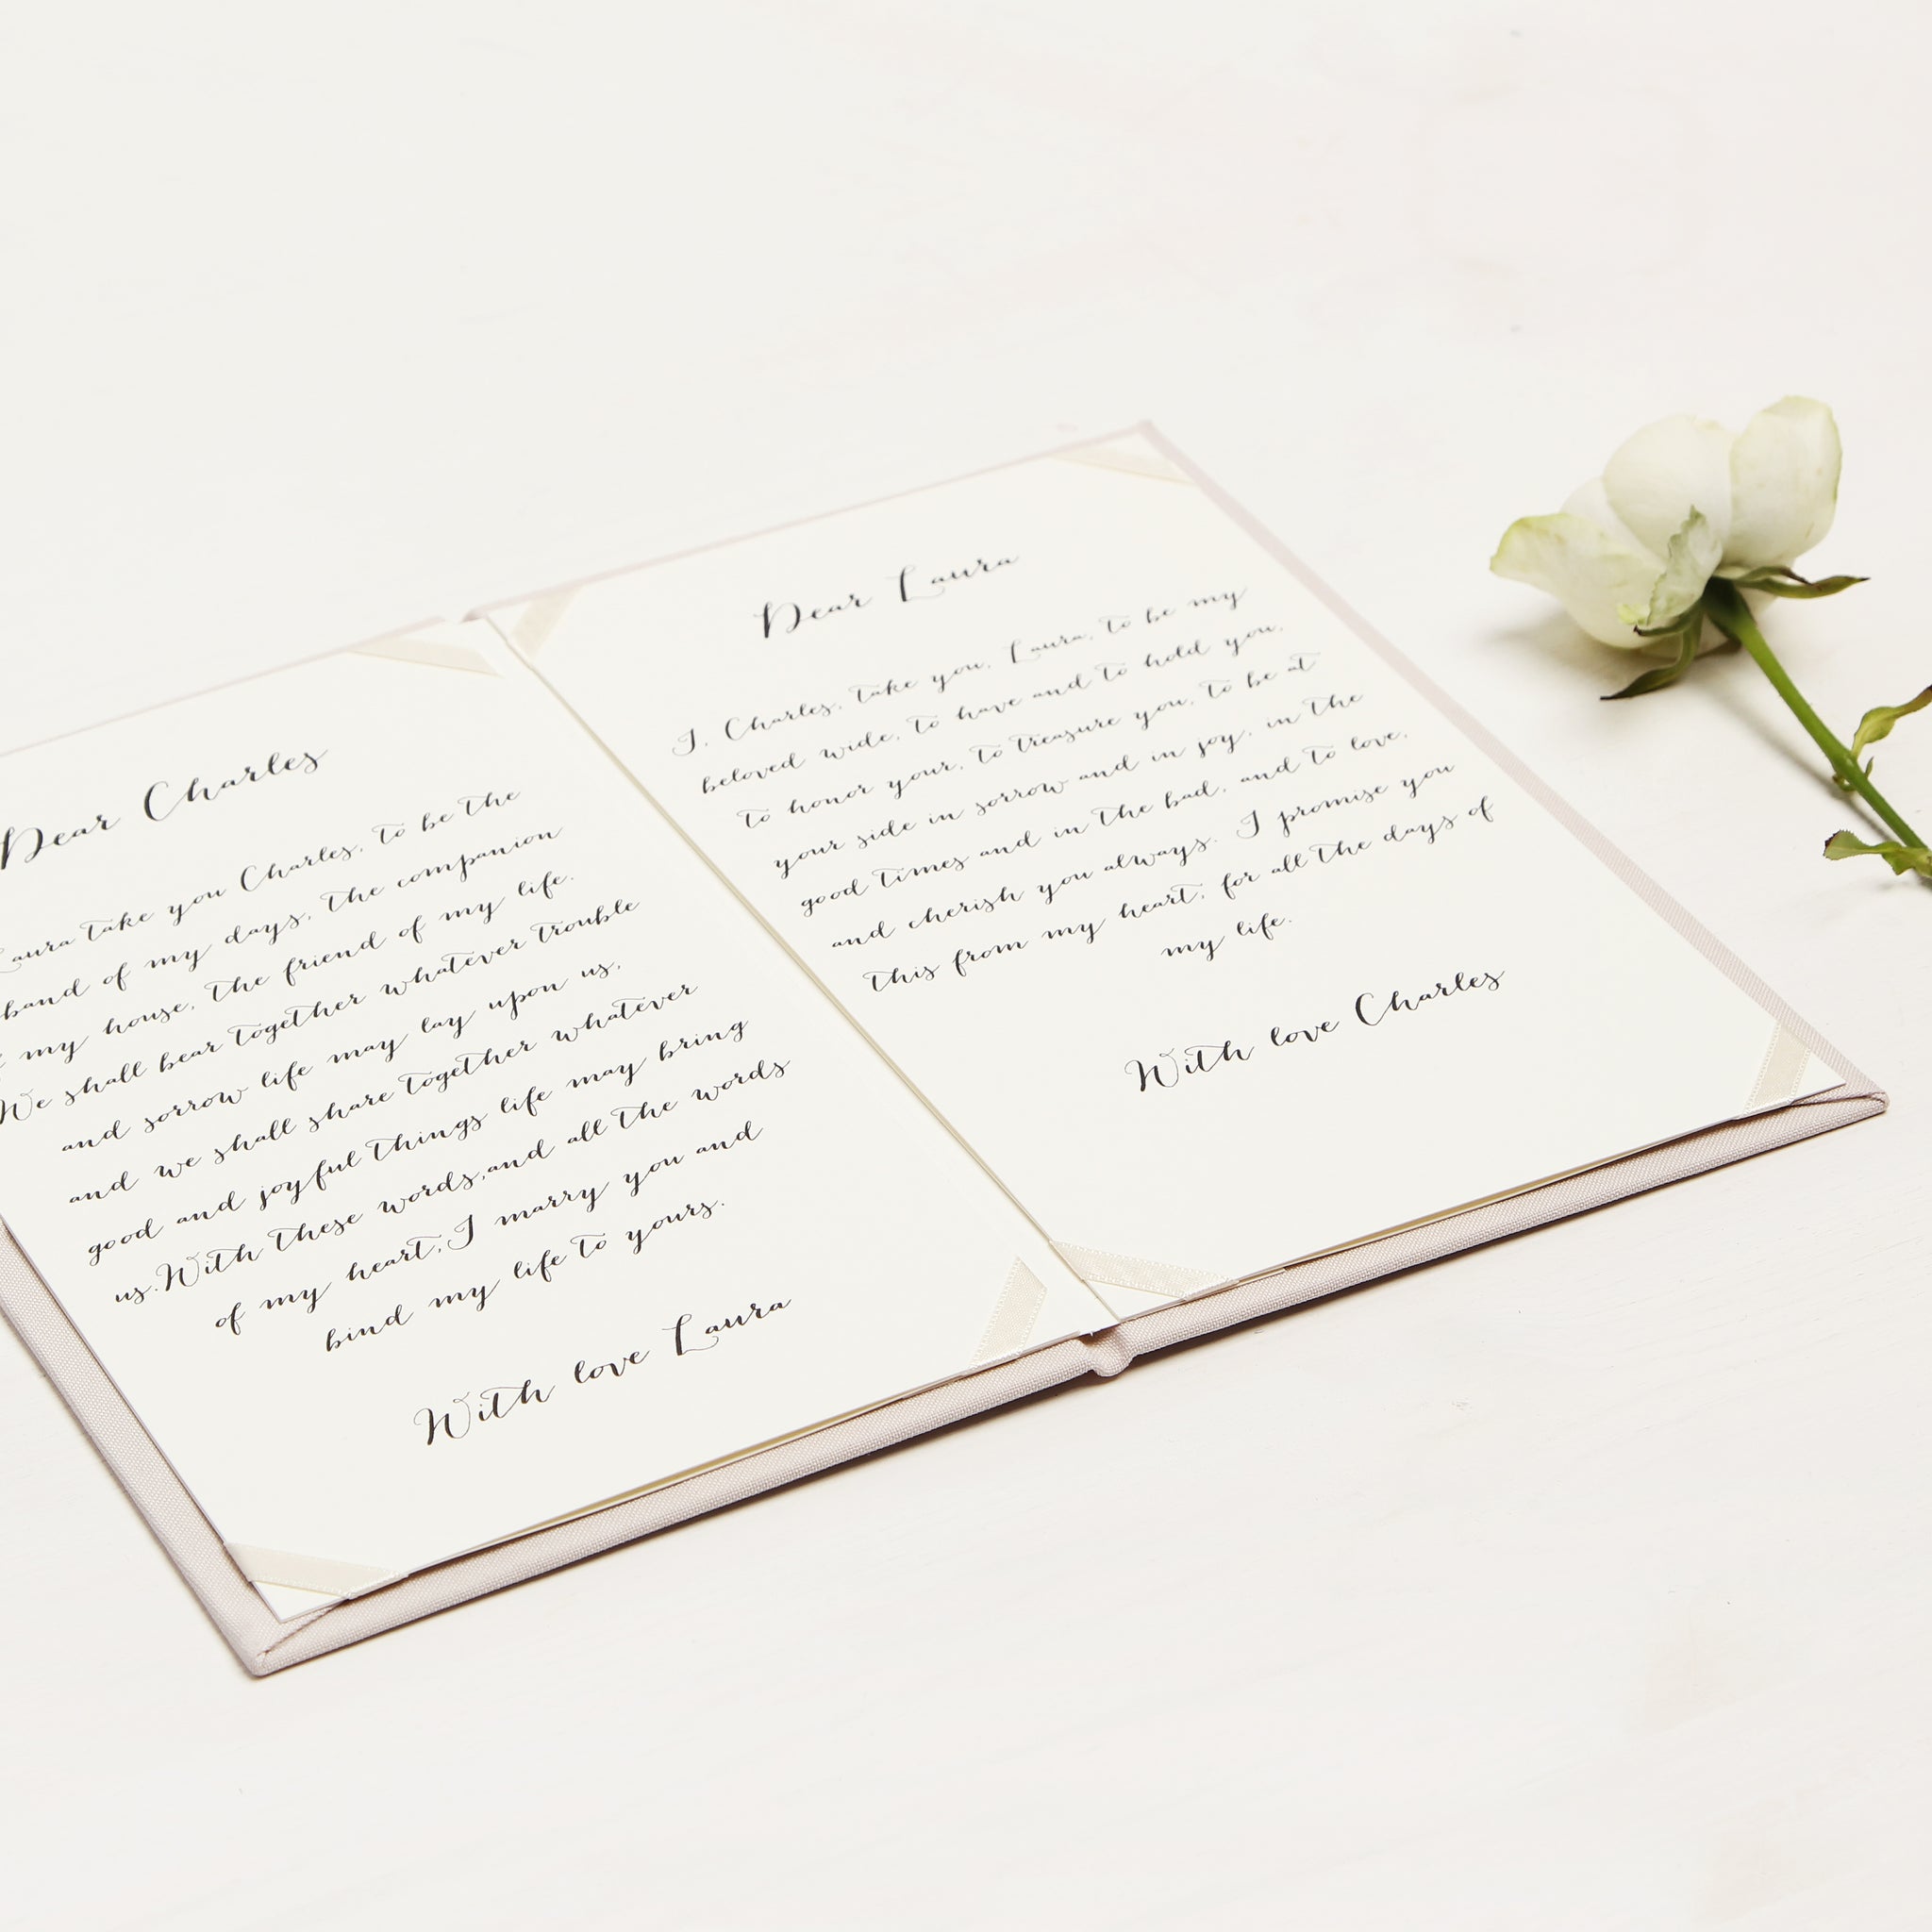 Personalised Wedding Vow Books Gold Foil Cream Keepsake Calligraphy Vows Bride and Groom Ceremony - Liumy 